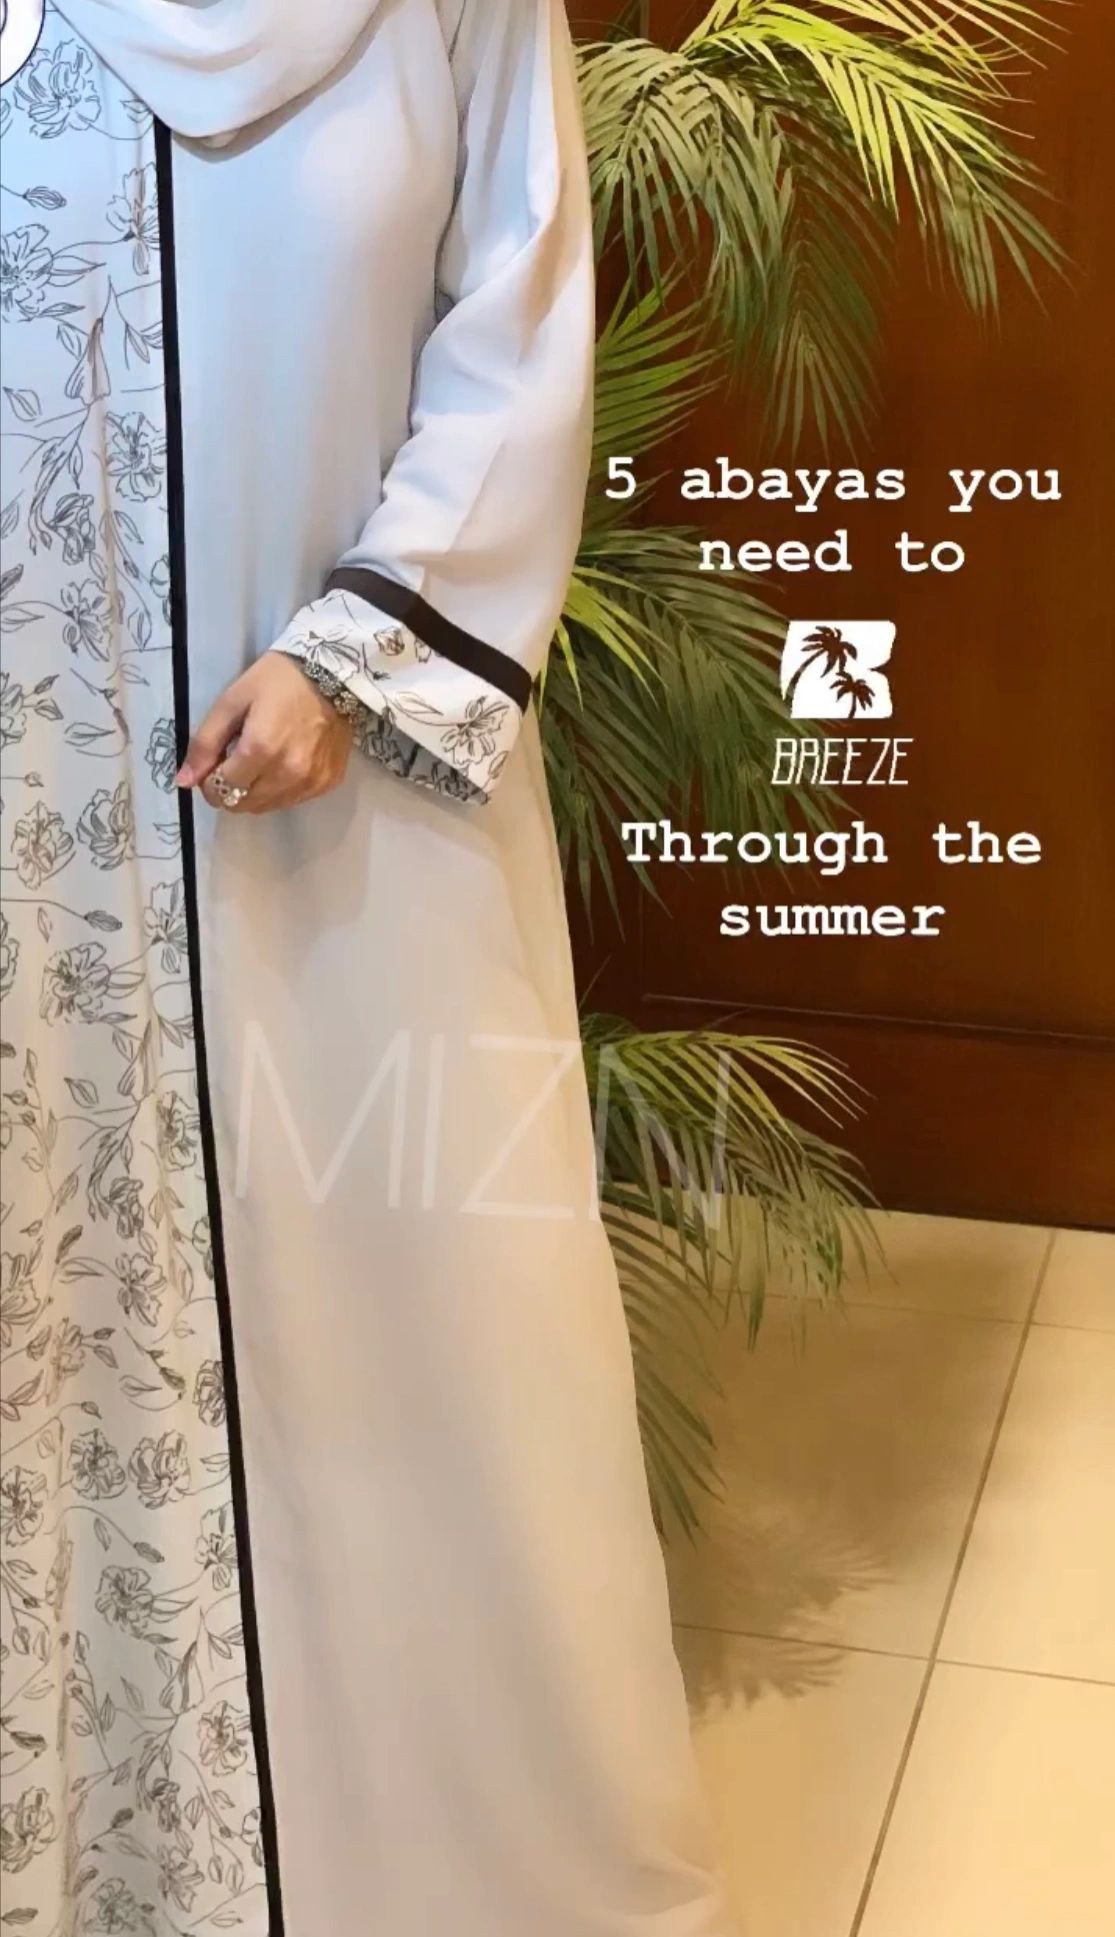 5 Abayas You Need to BREEZE Through the Summer